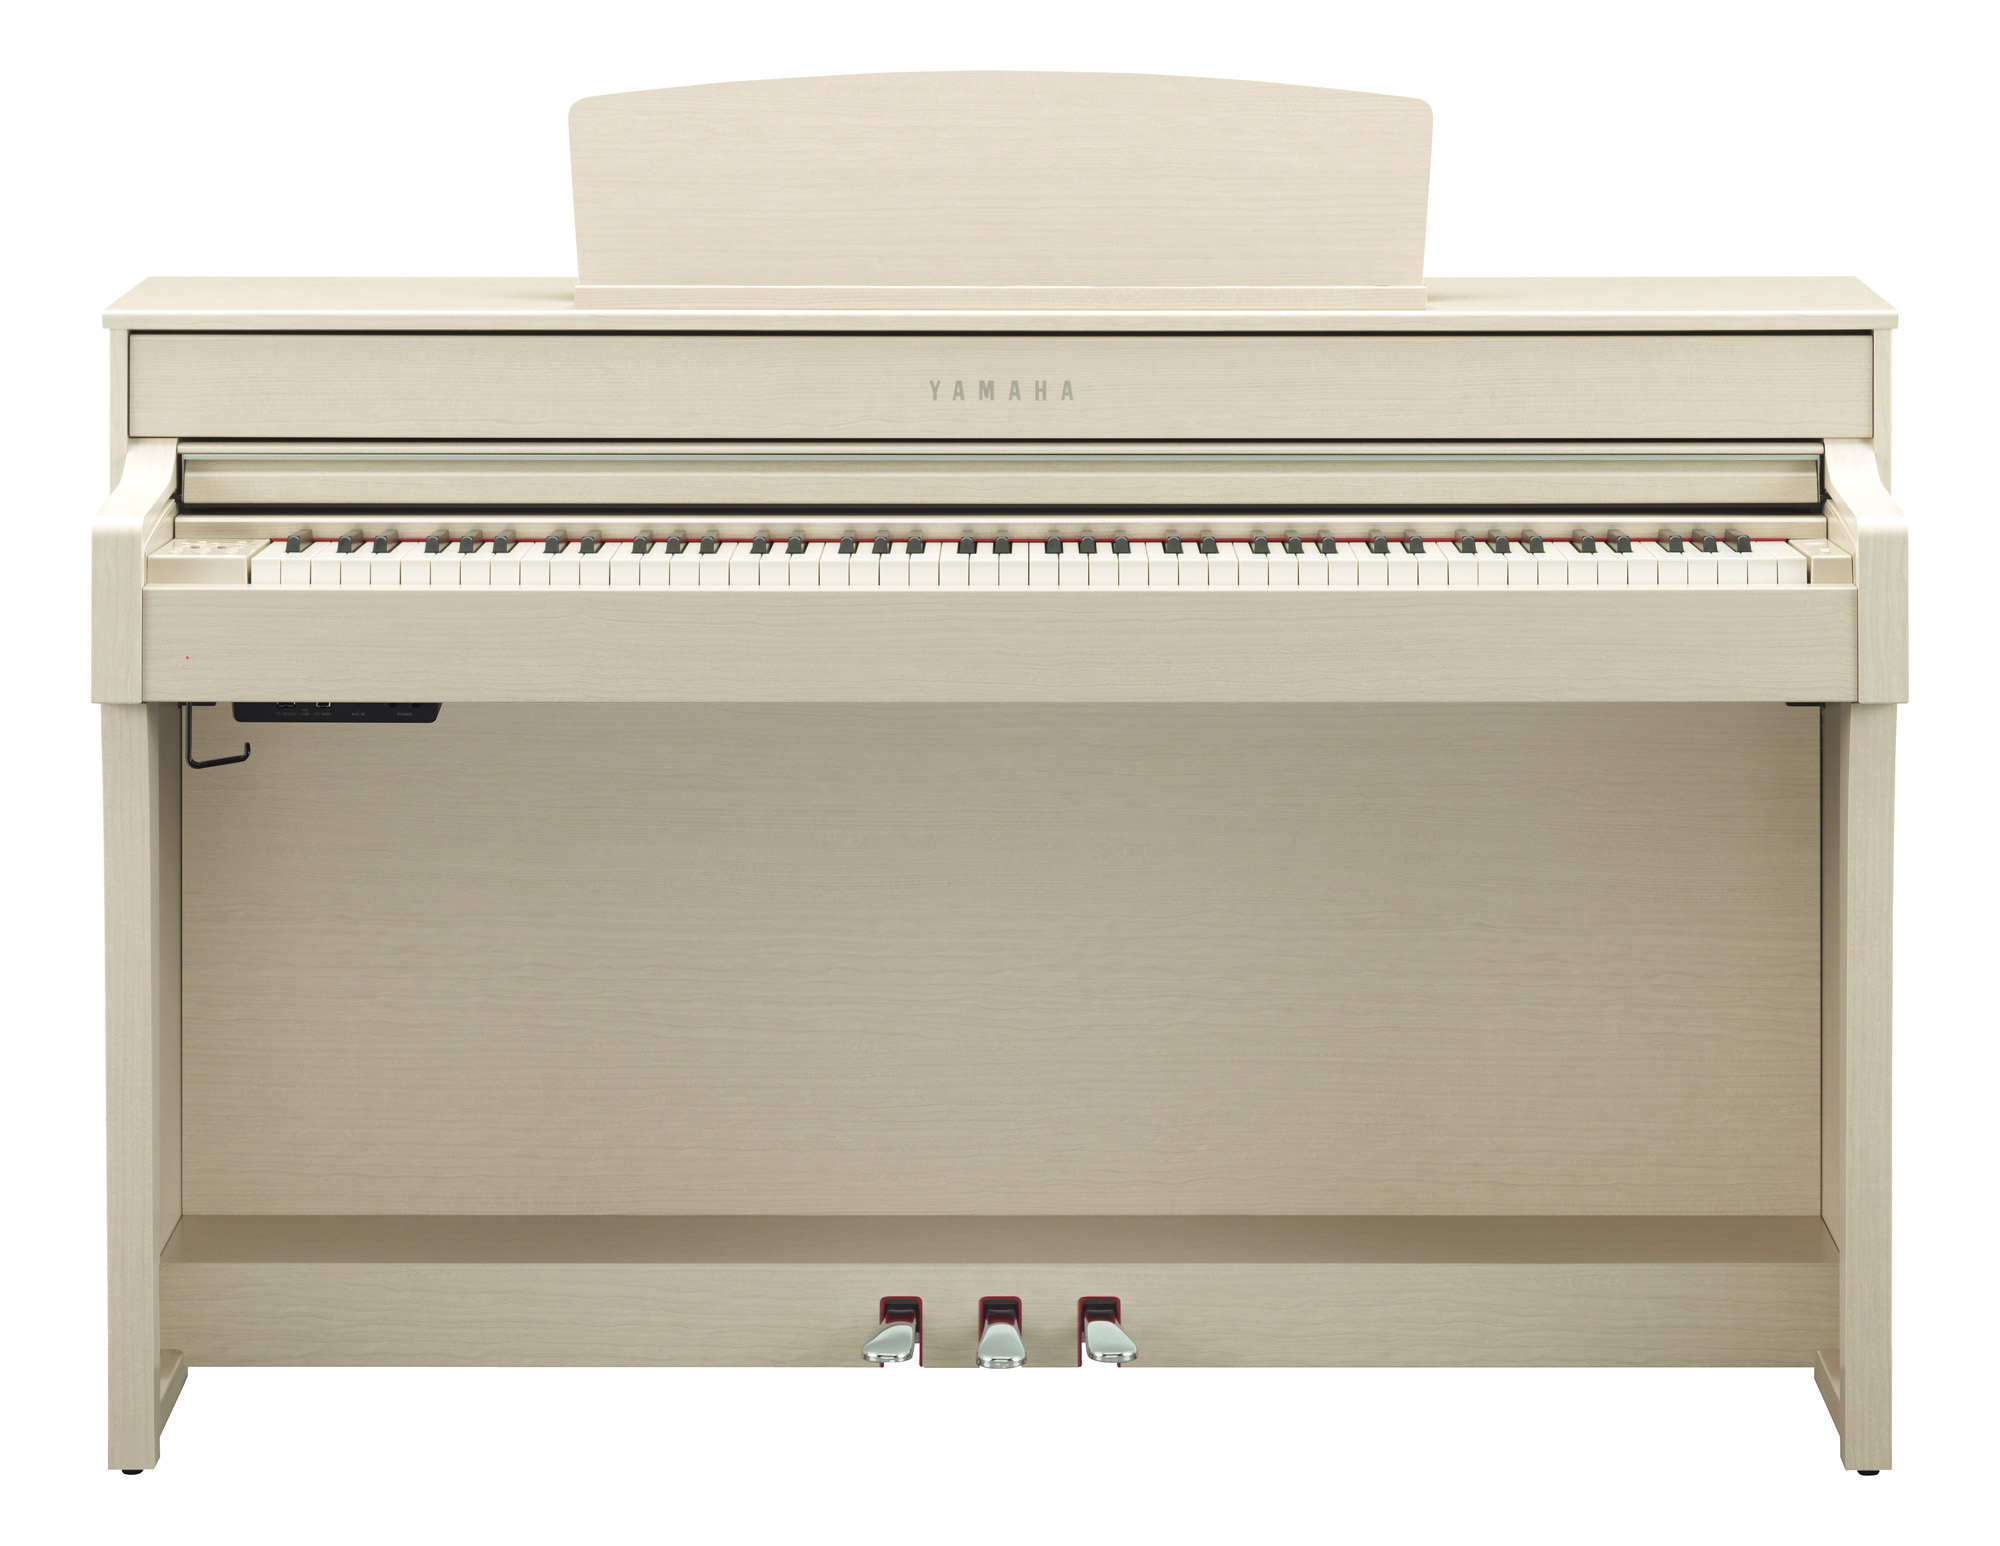 Yamaha Clp-645 - White Ash - Digital piano with stand - Variation 1